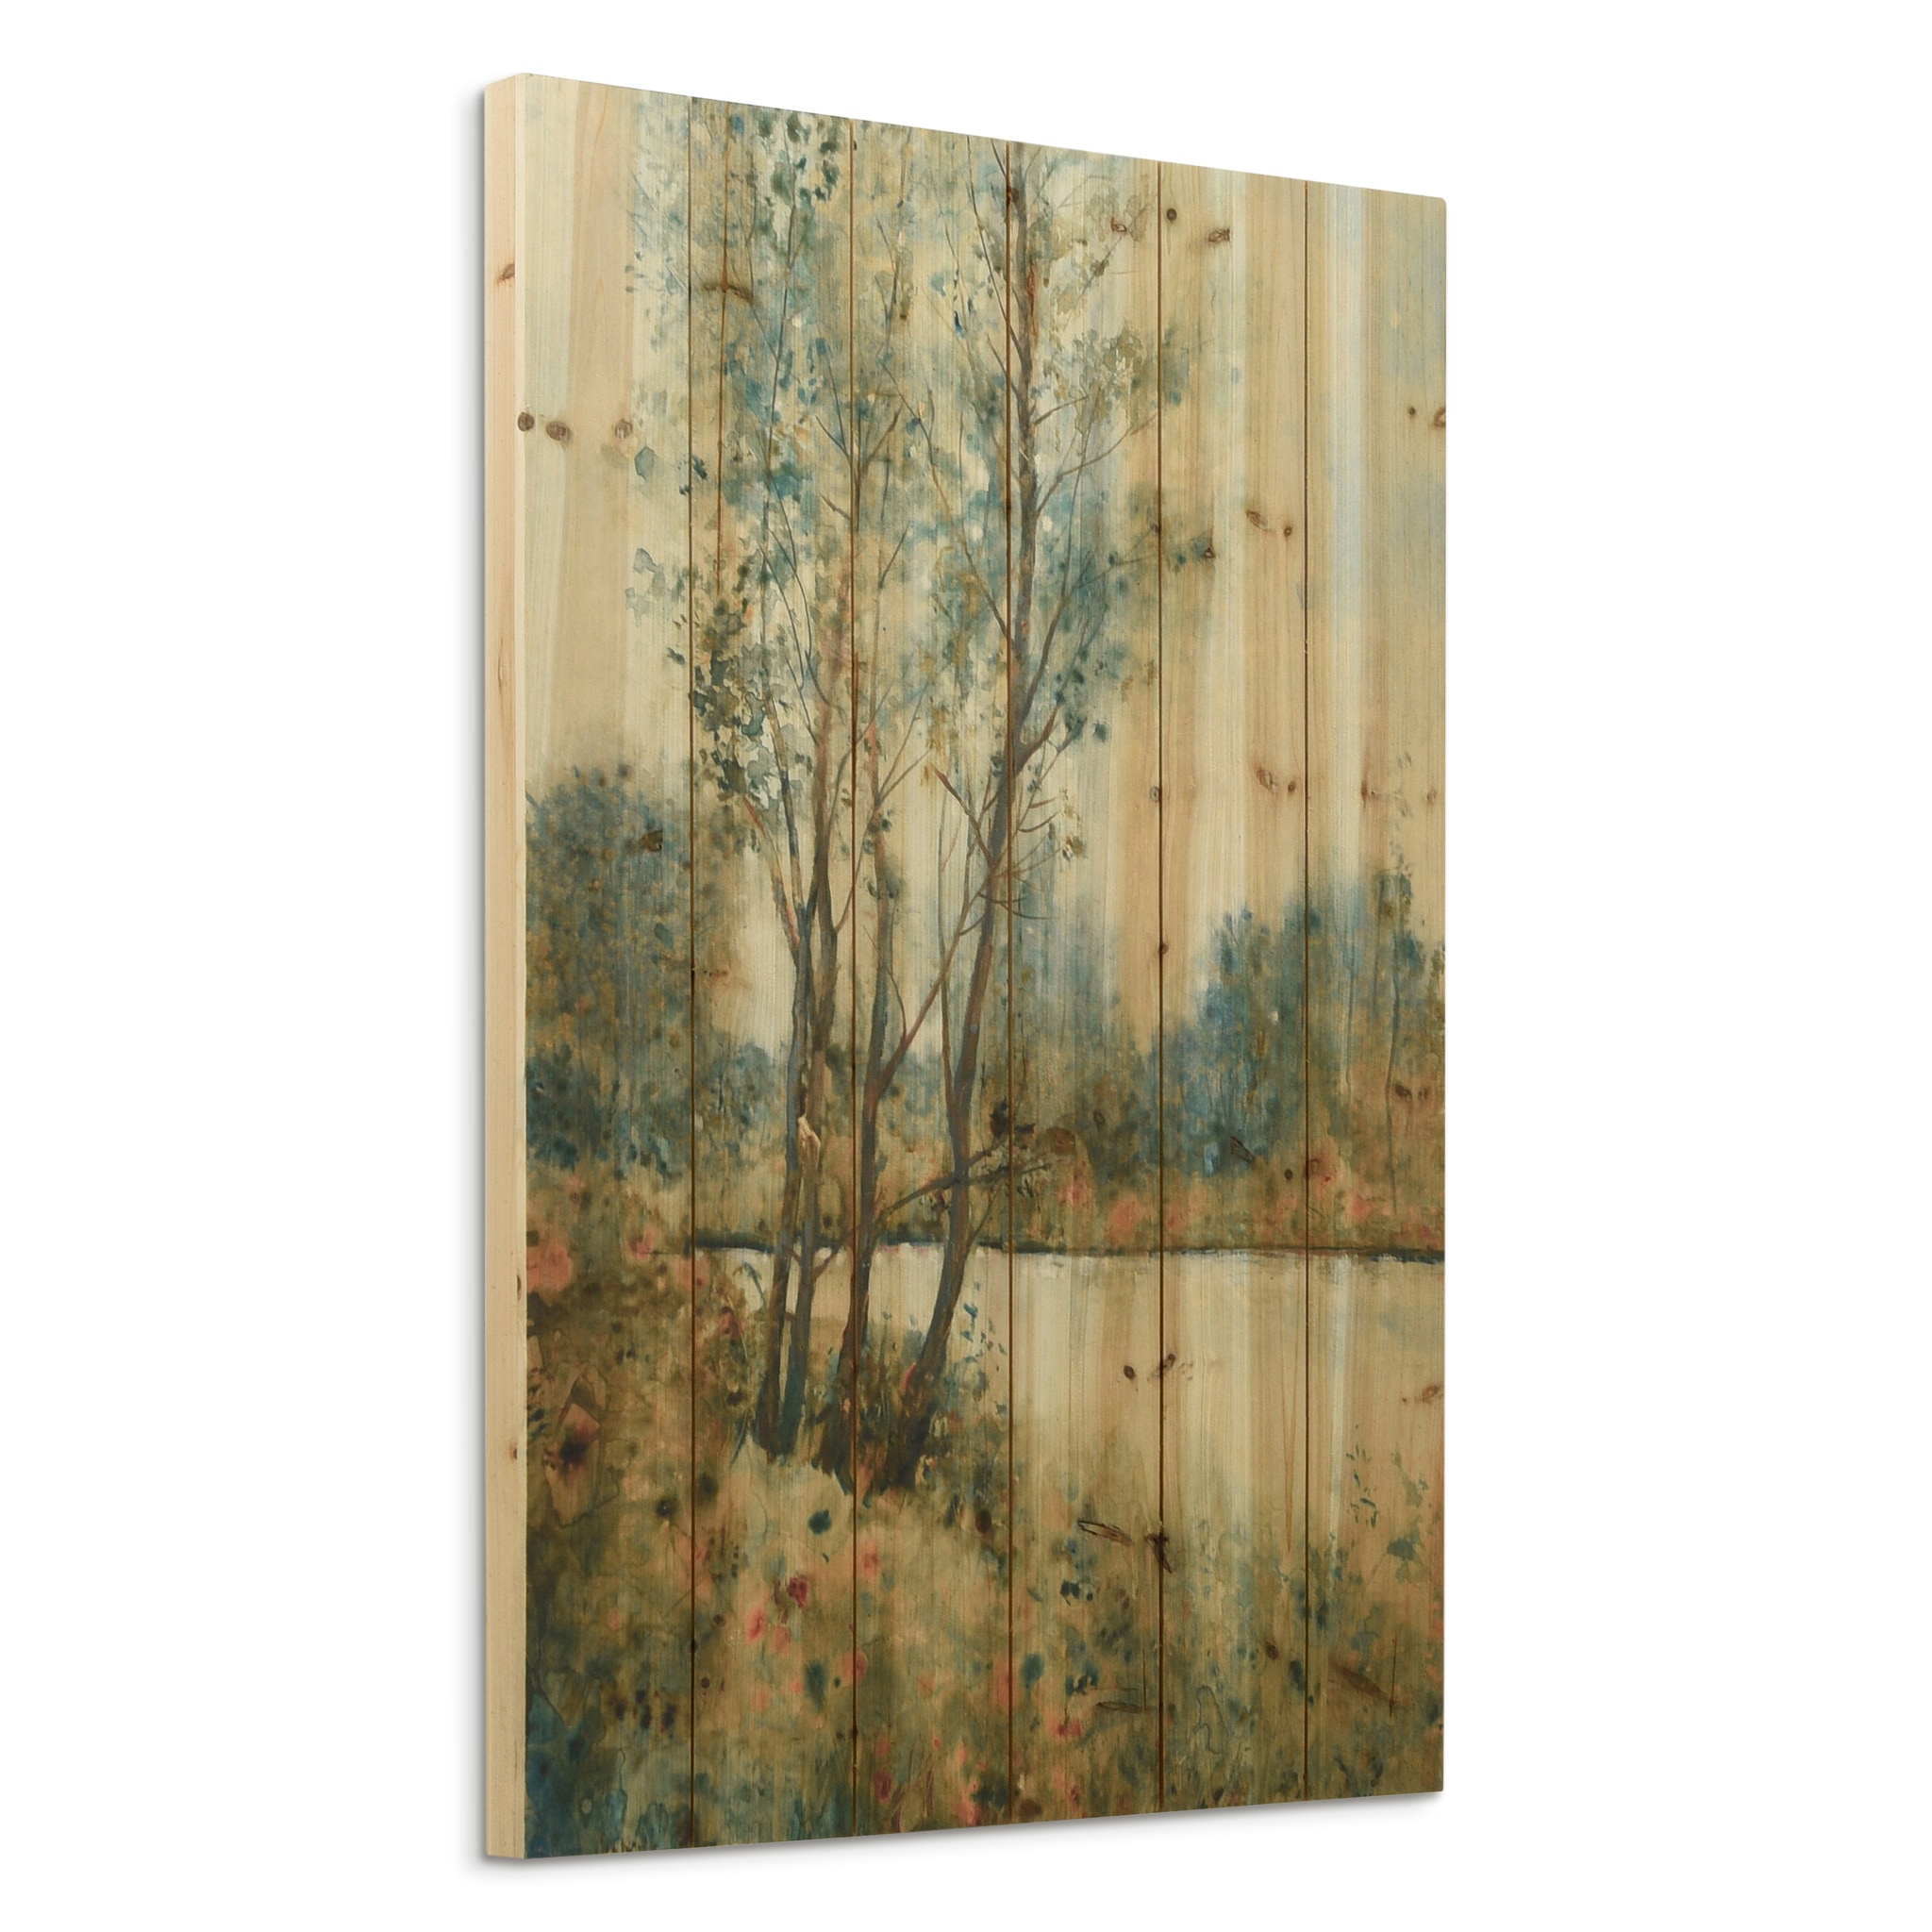 Empire Art Direct 24-in H x 36-in W Landscape Wood Print at Lowes.com